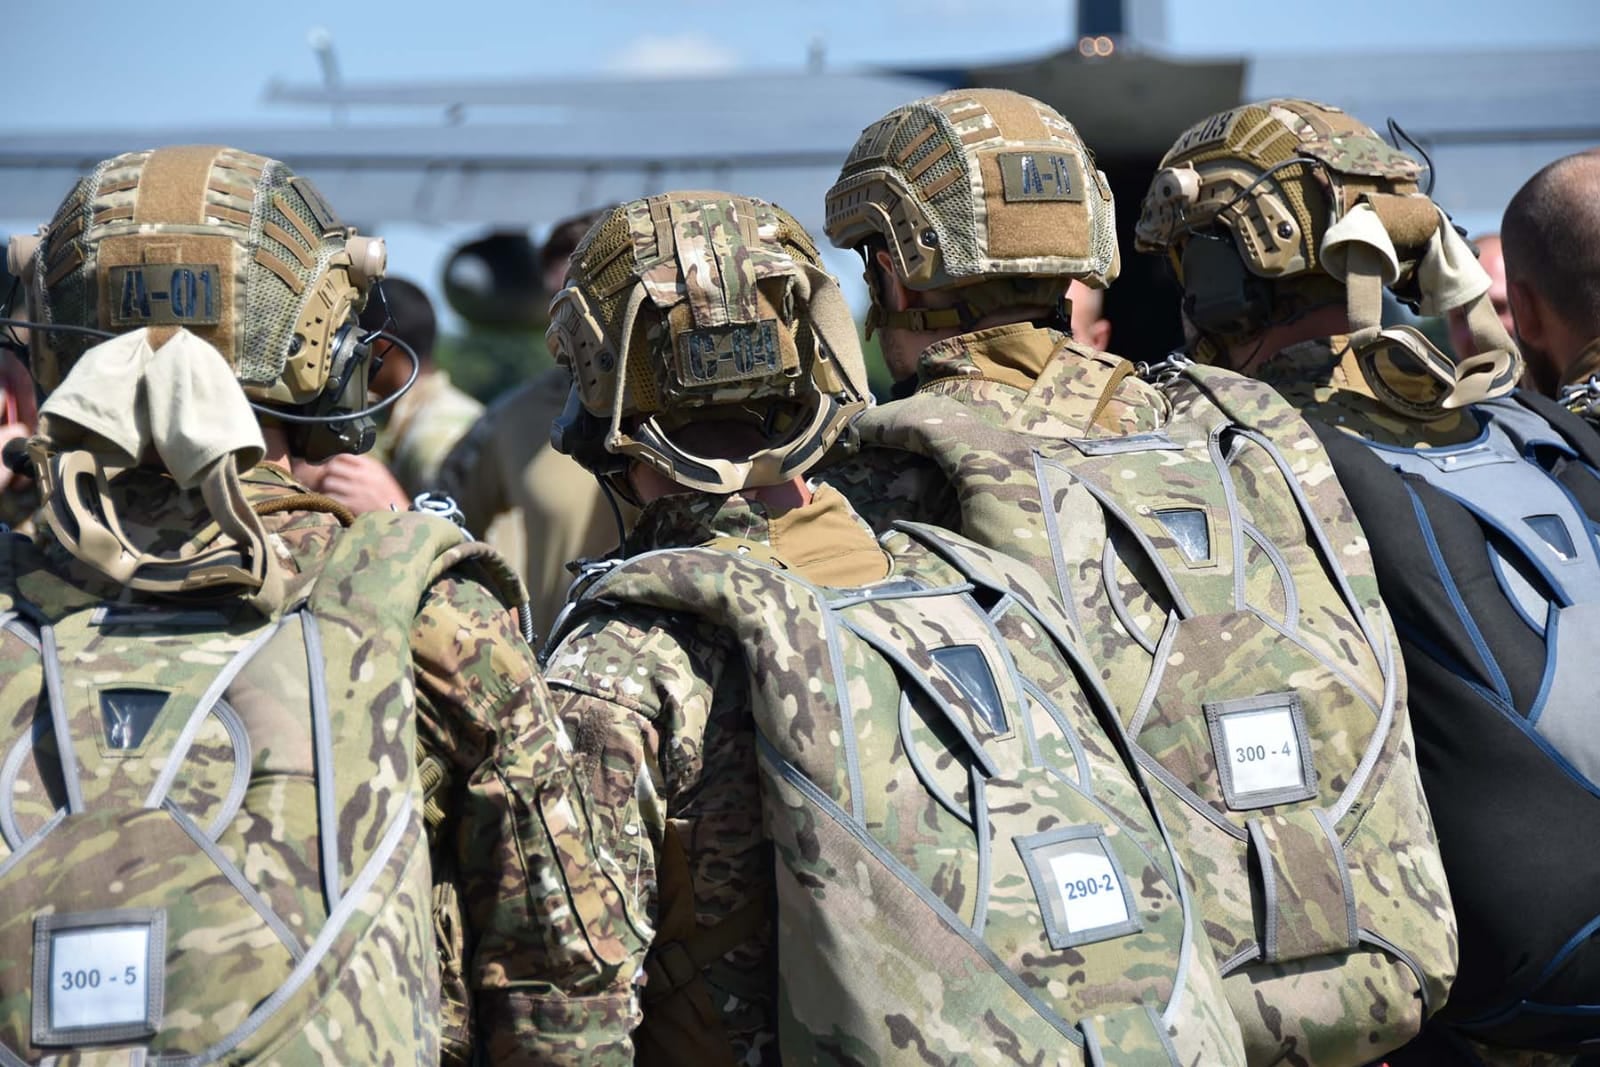 The SOF of the Armed Forces of Ukraine and the United States are conducting joint exercises